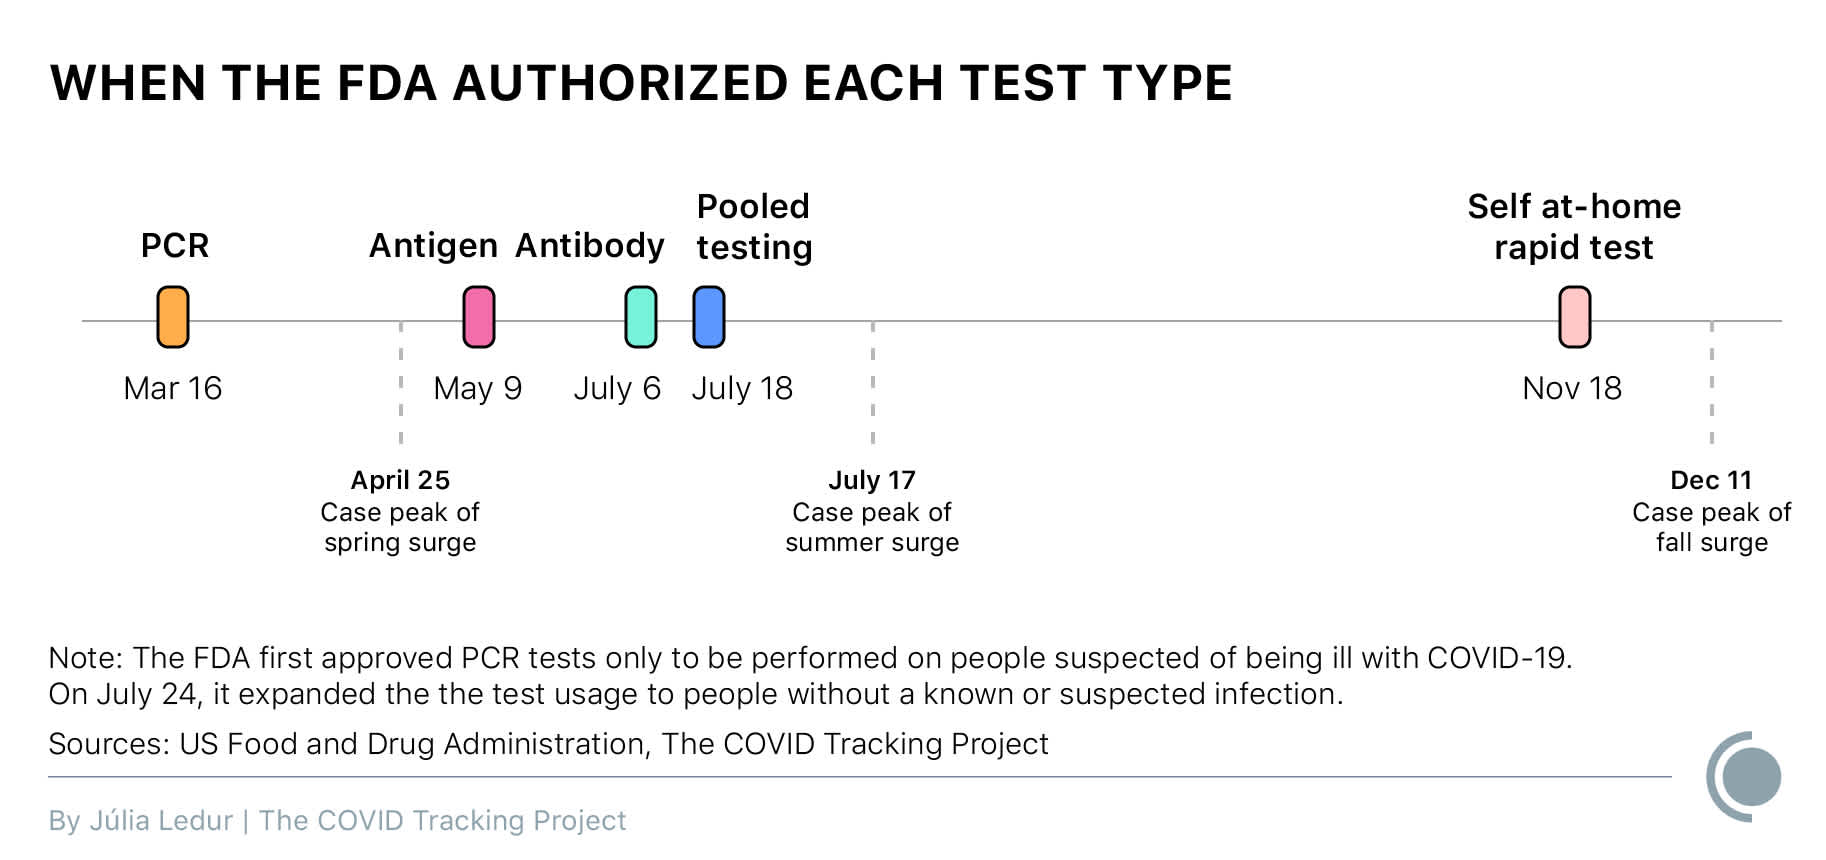 Graphic showing when the FDA authorized each test type. PCR: March 16; Antigen: May 9; Antibody: July 6; Pooled testing: July 18; Self at-home rapid test: November 18. Lines mark the case peaks of the pandemic in the US in the spring (April 25), summer (July 17), and fall (December 11).